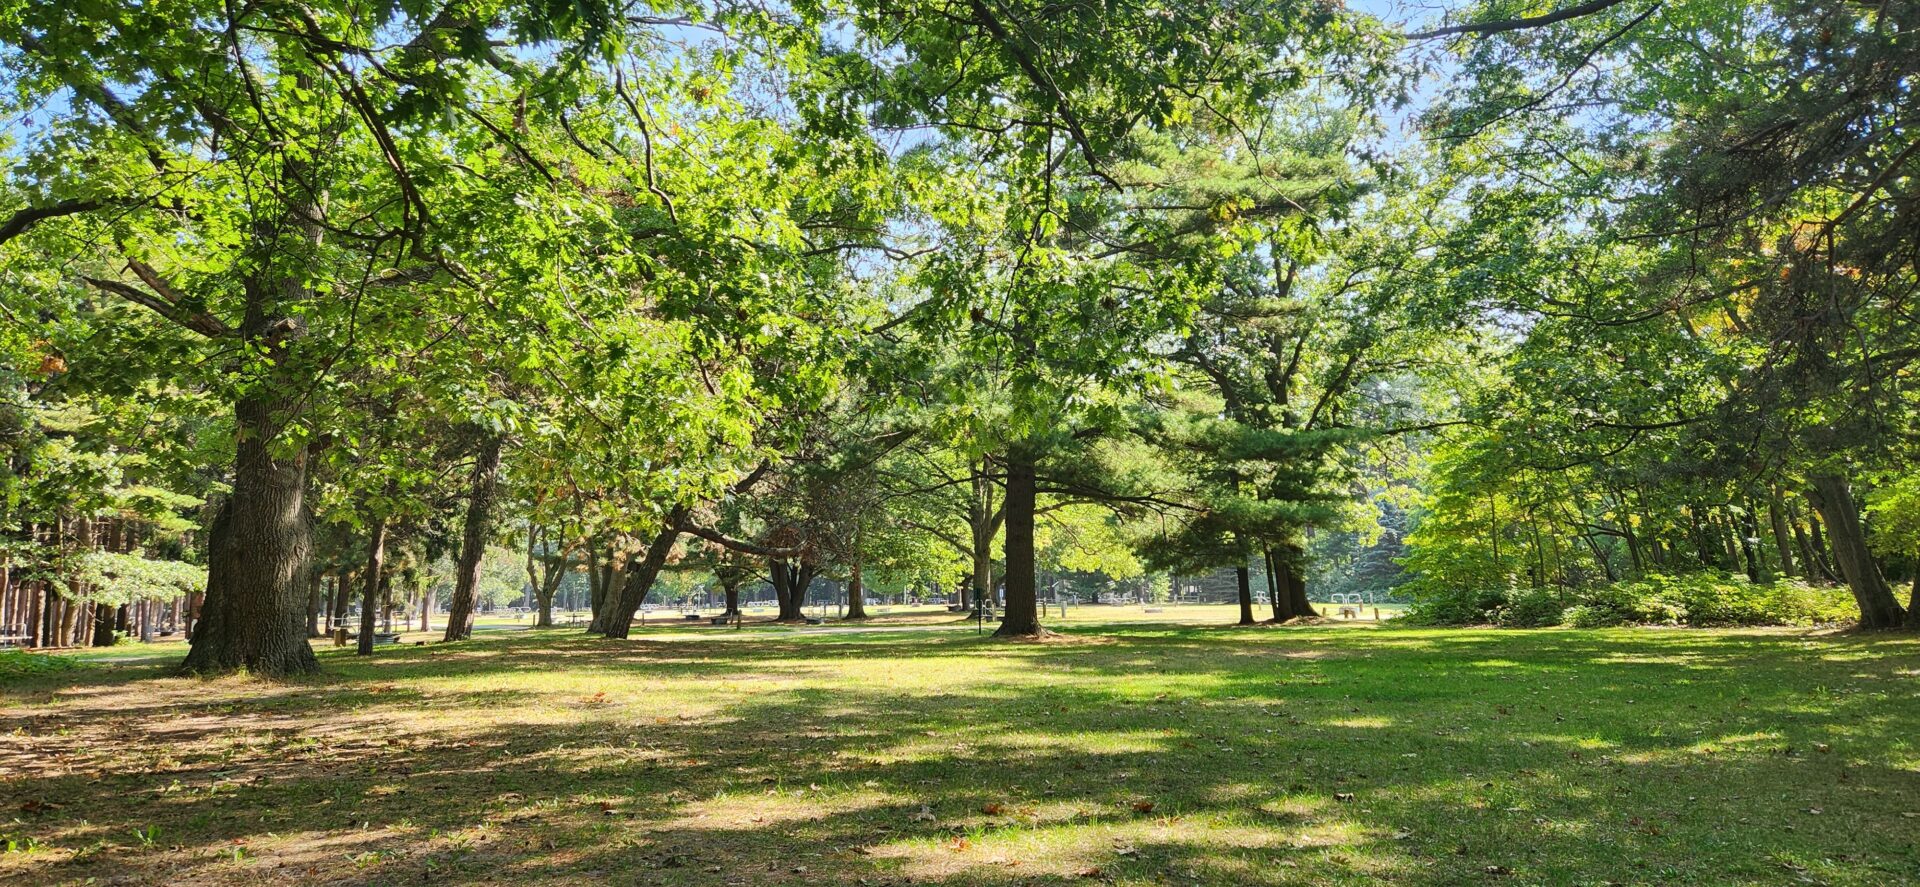 Green trees in pioneer campground